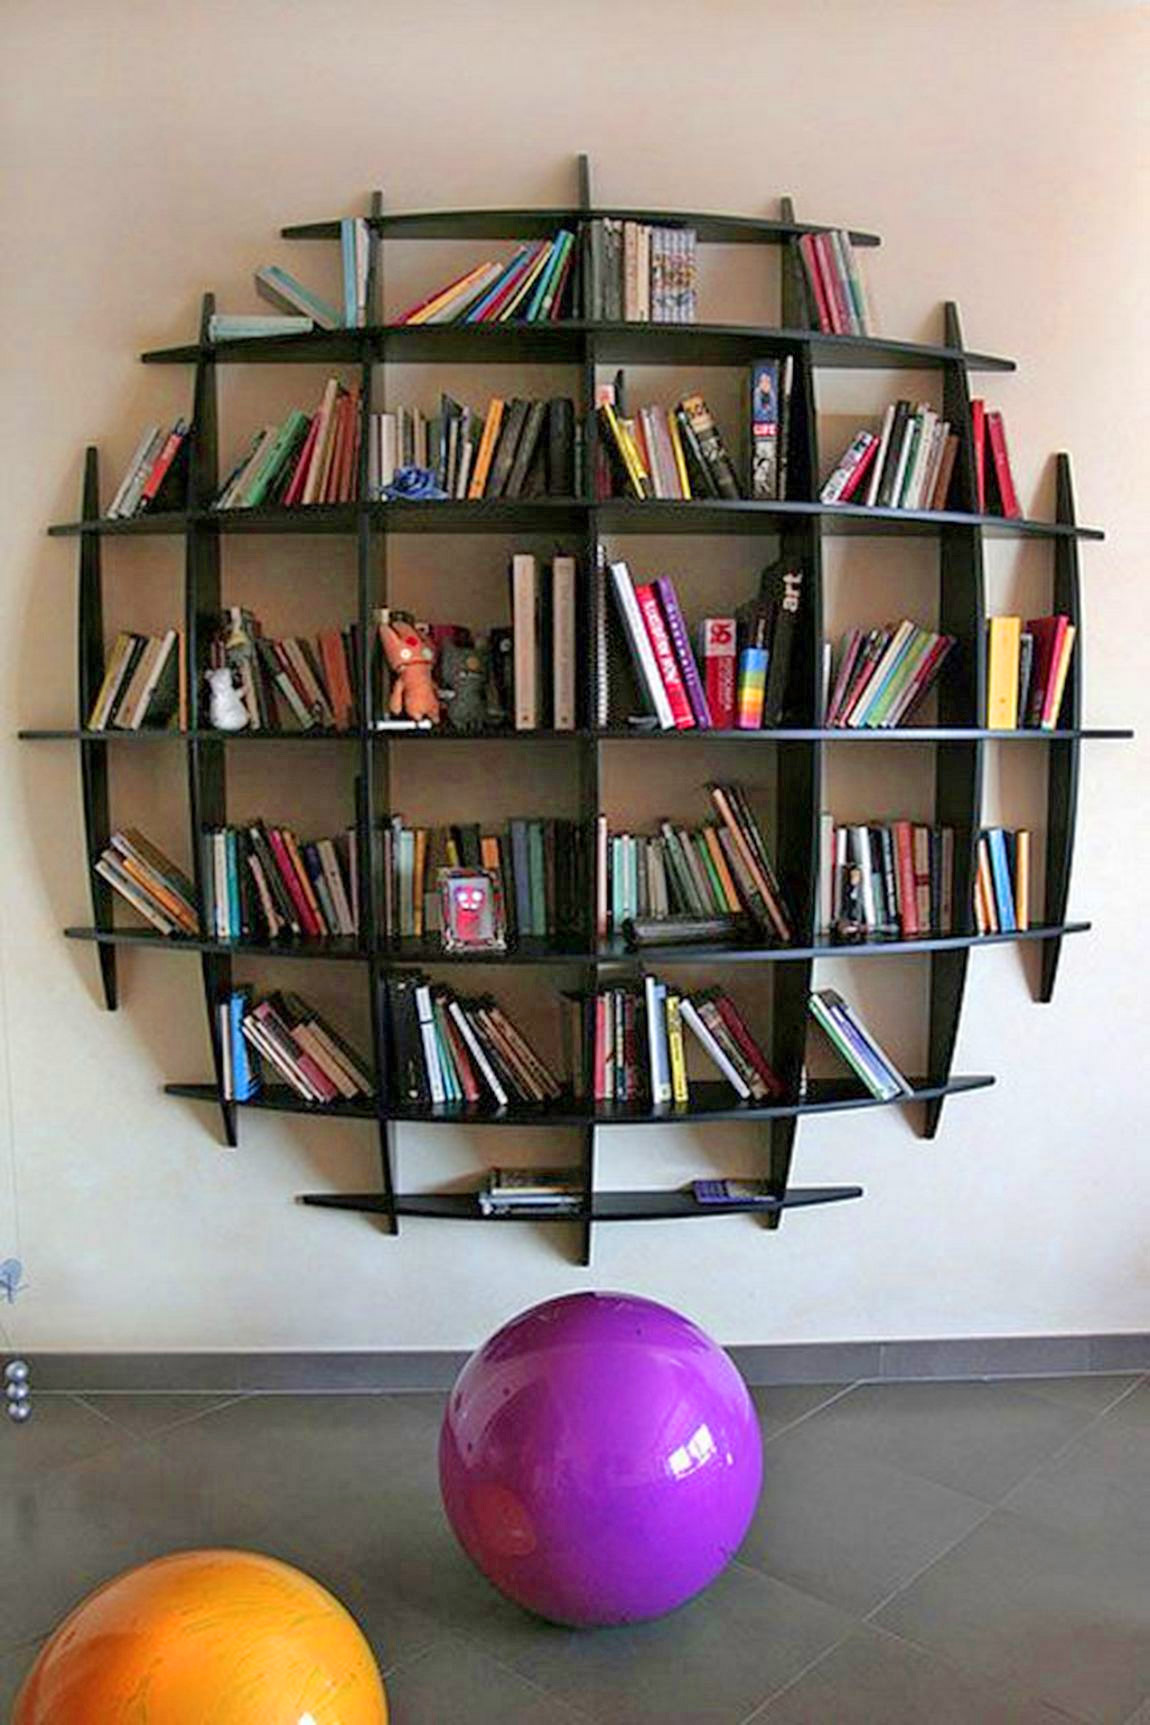 3D Sphere Bookshelf Looks Like It's Sinking Into Your Wall - Curved Circular Wooden Bookshelf